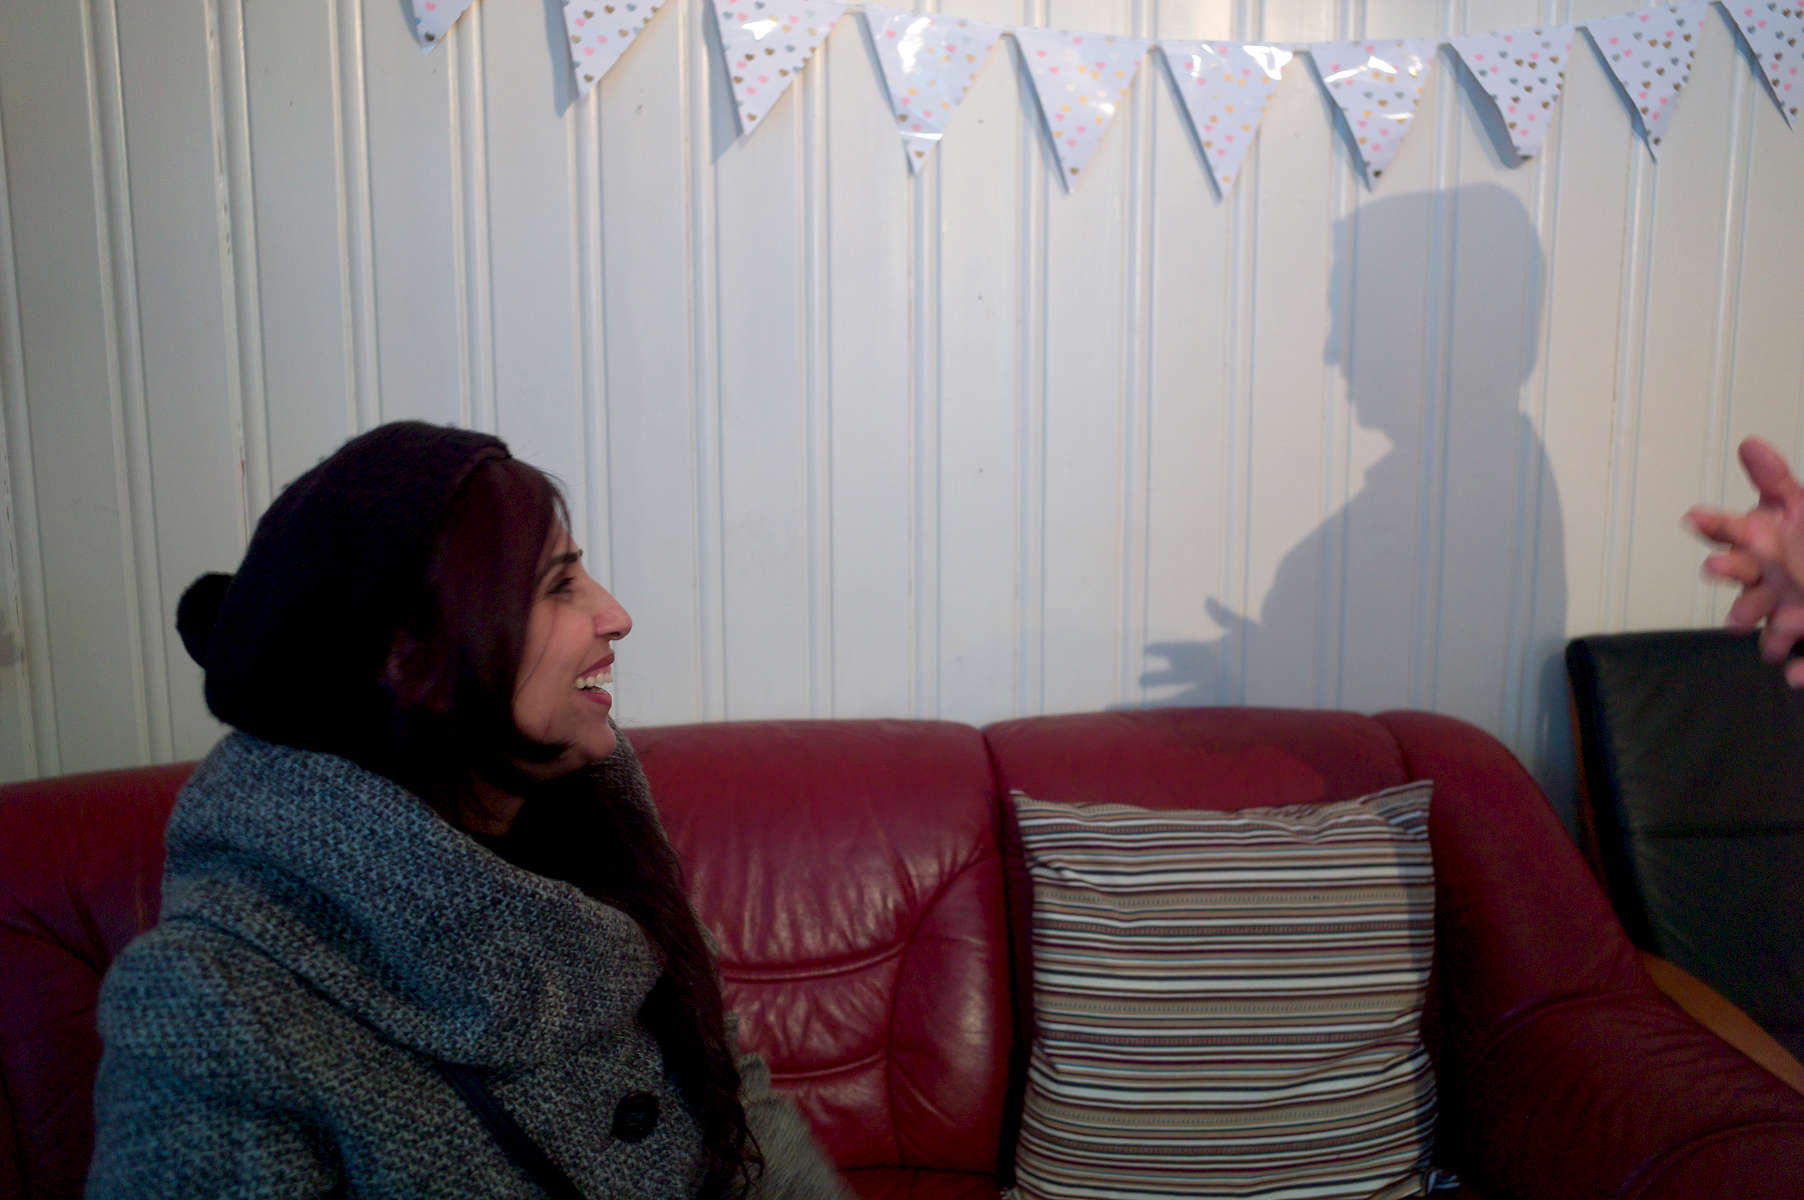 A rejected asylum seeker sits on a sofa talking to an Arabic woman whose only image is that of the shadow she cast on a wall.